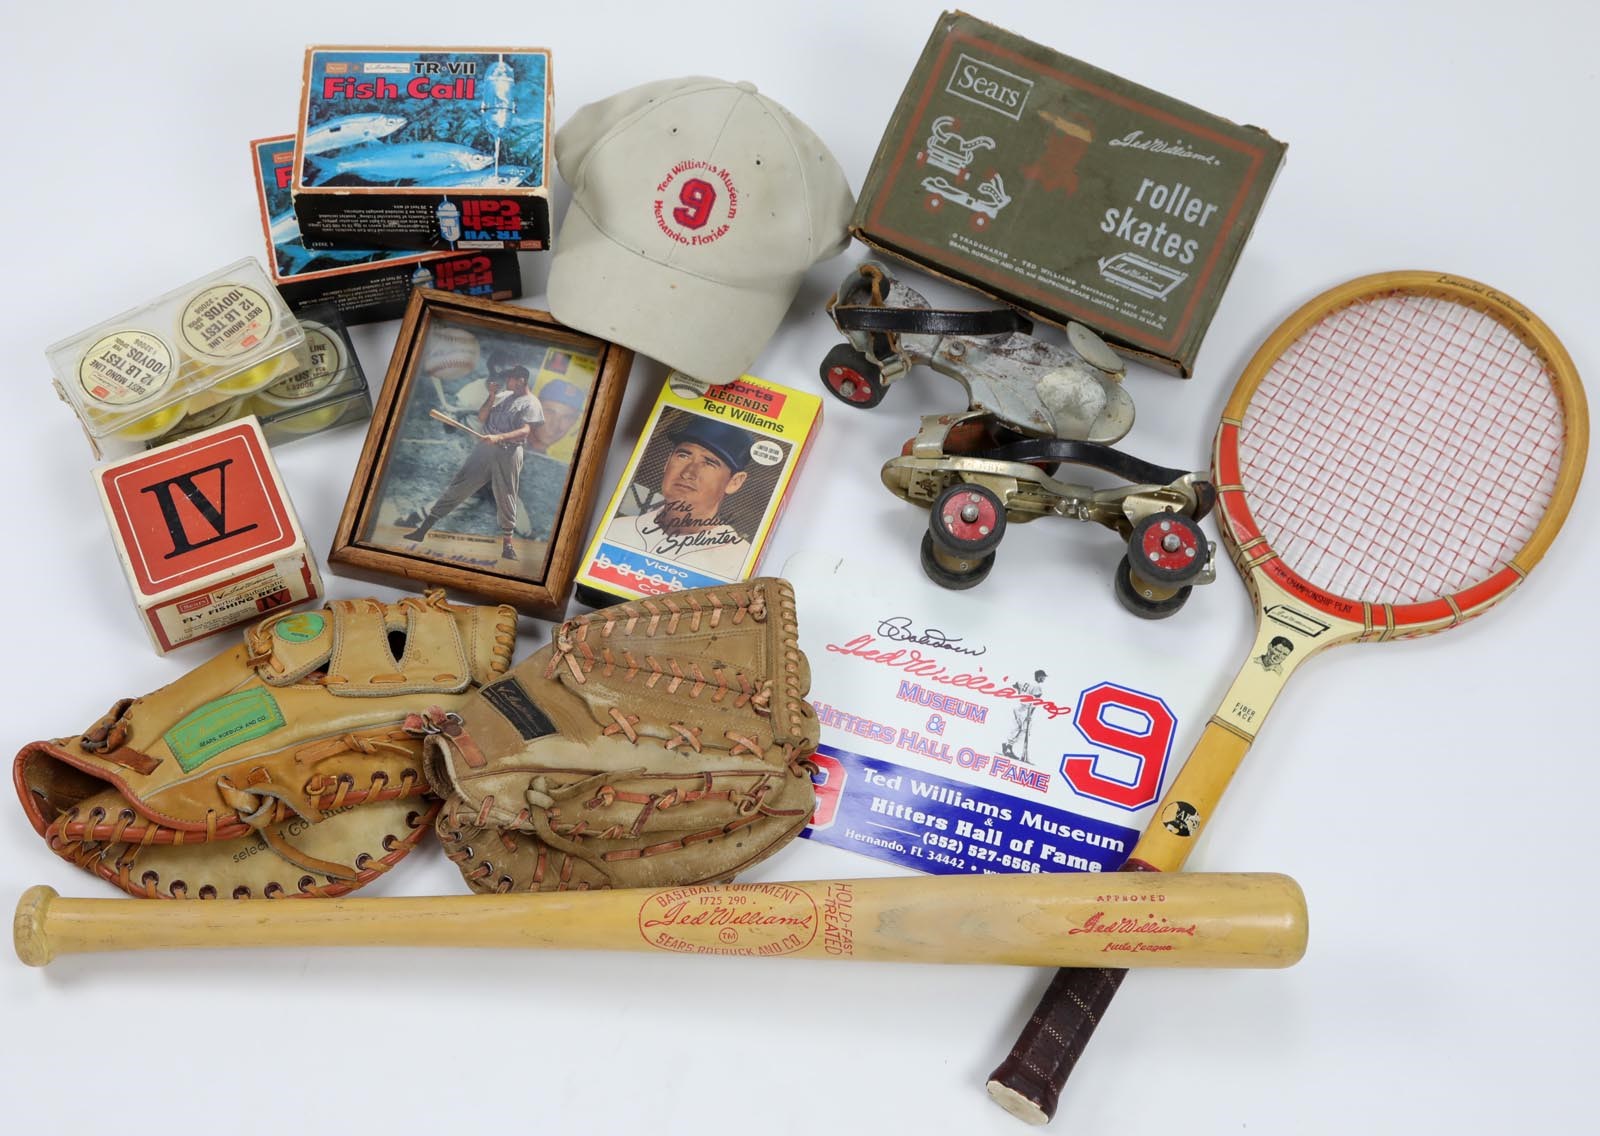 Boston Sports - Ted Williams Endorsed Items and More (from Ted Williams Museum)